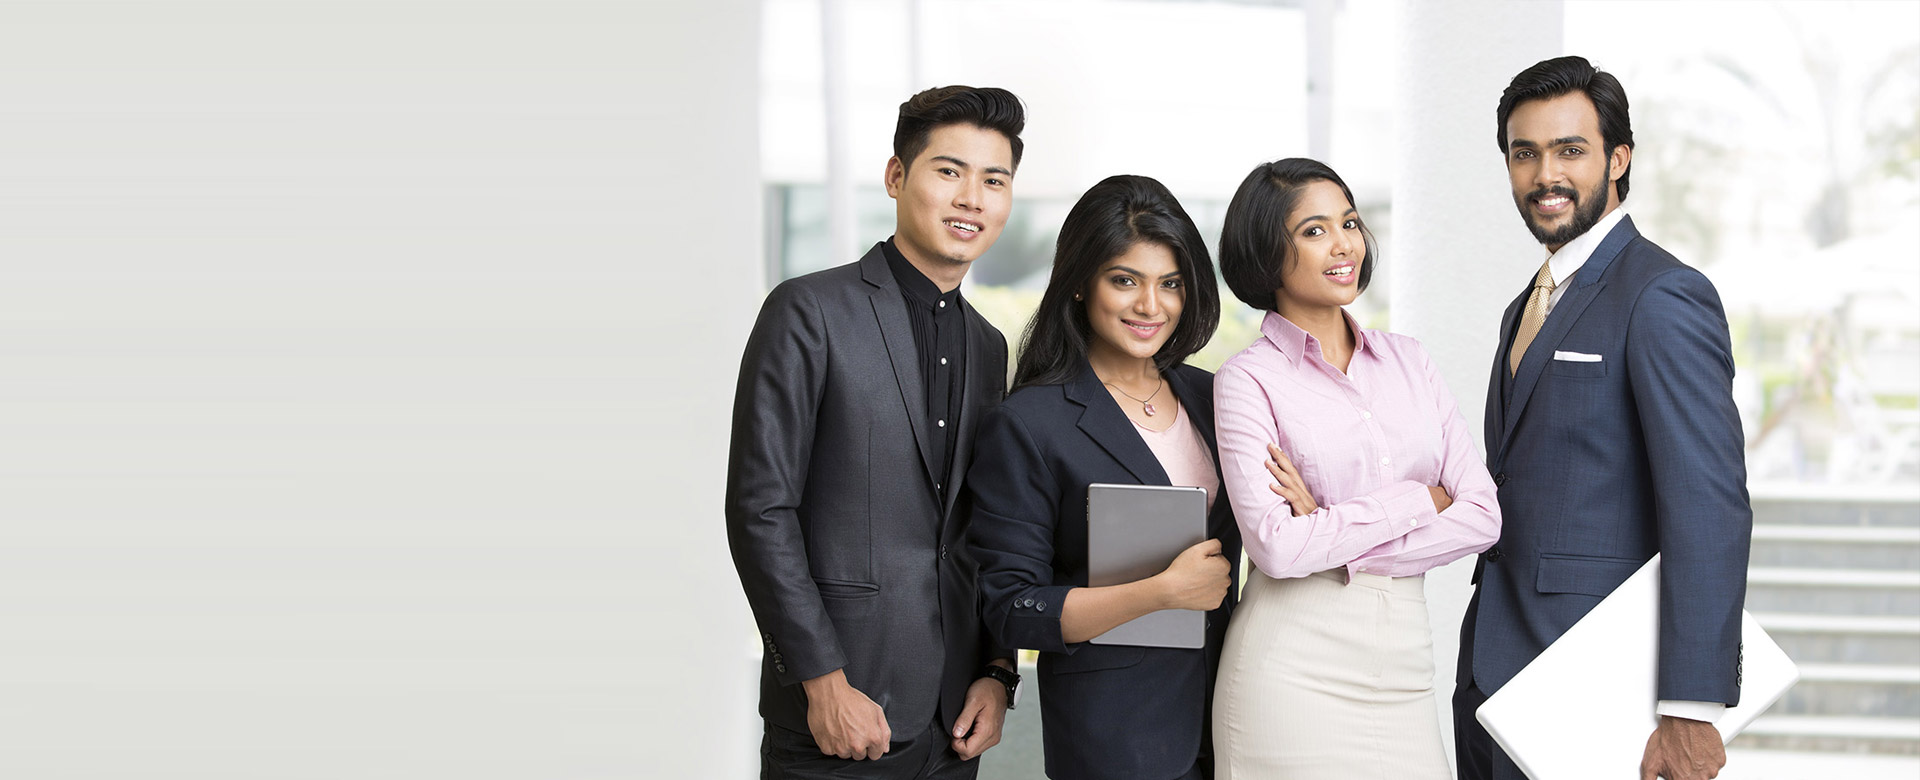 HR consultant in amritsar Labour Law consultant in amritsar PF ESI consultant in amritsar Payroll consultant in amritsar ESI consultant in amritsar Contractor license in amritsar Labour license in amritsar Factory license in amritsar registration under Shops and commercial establishment act in amritsar